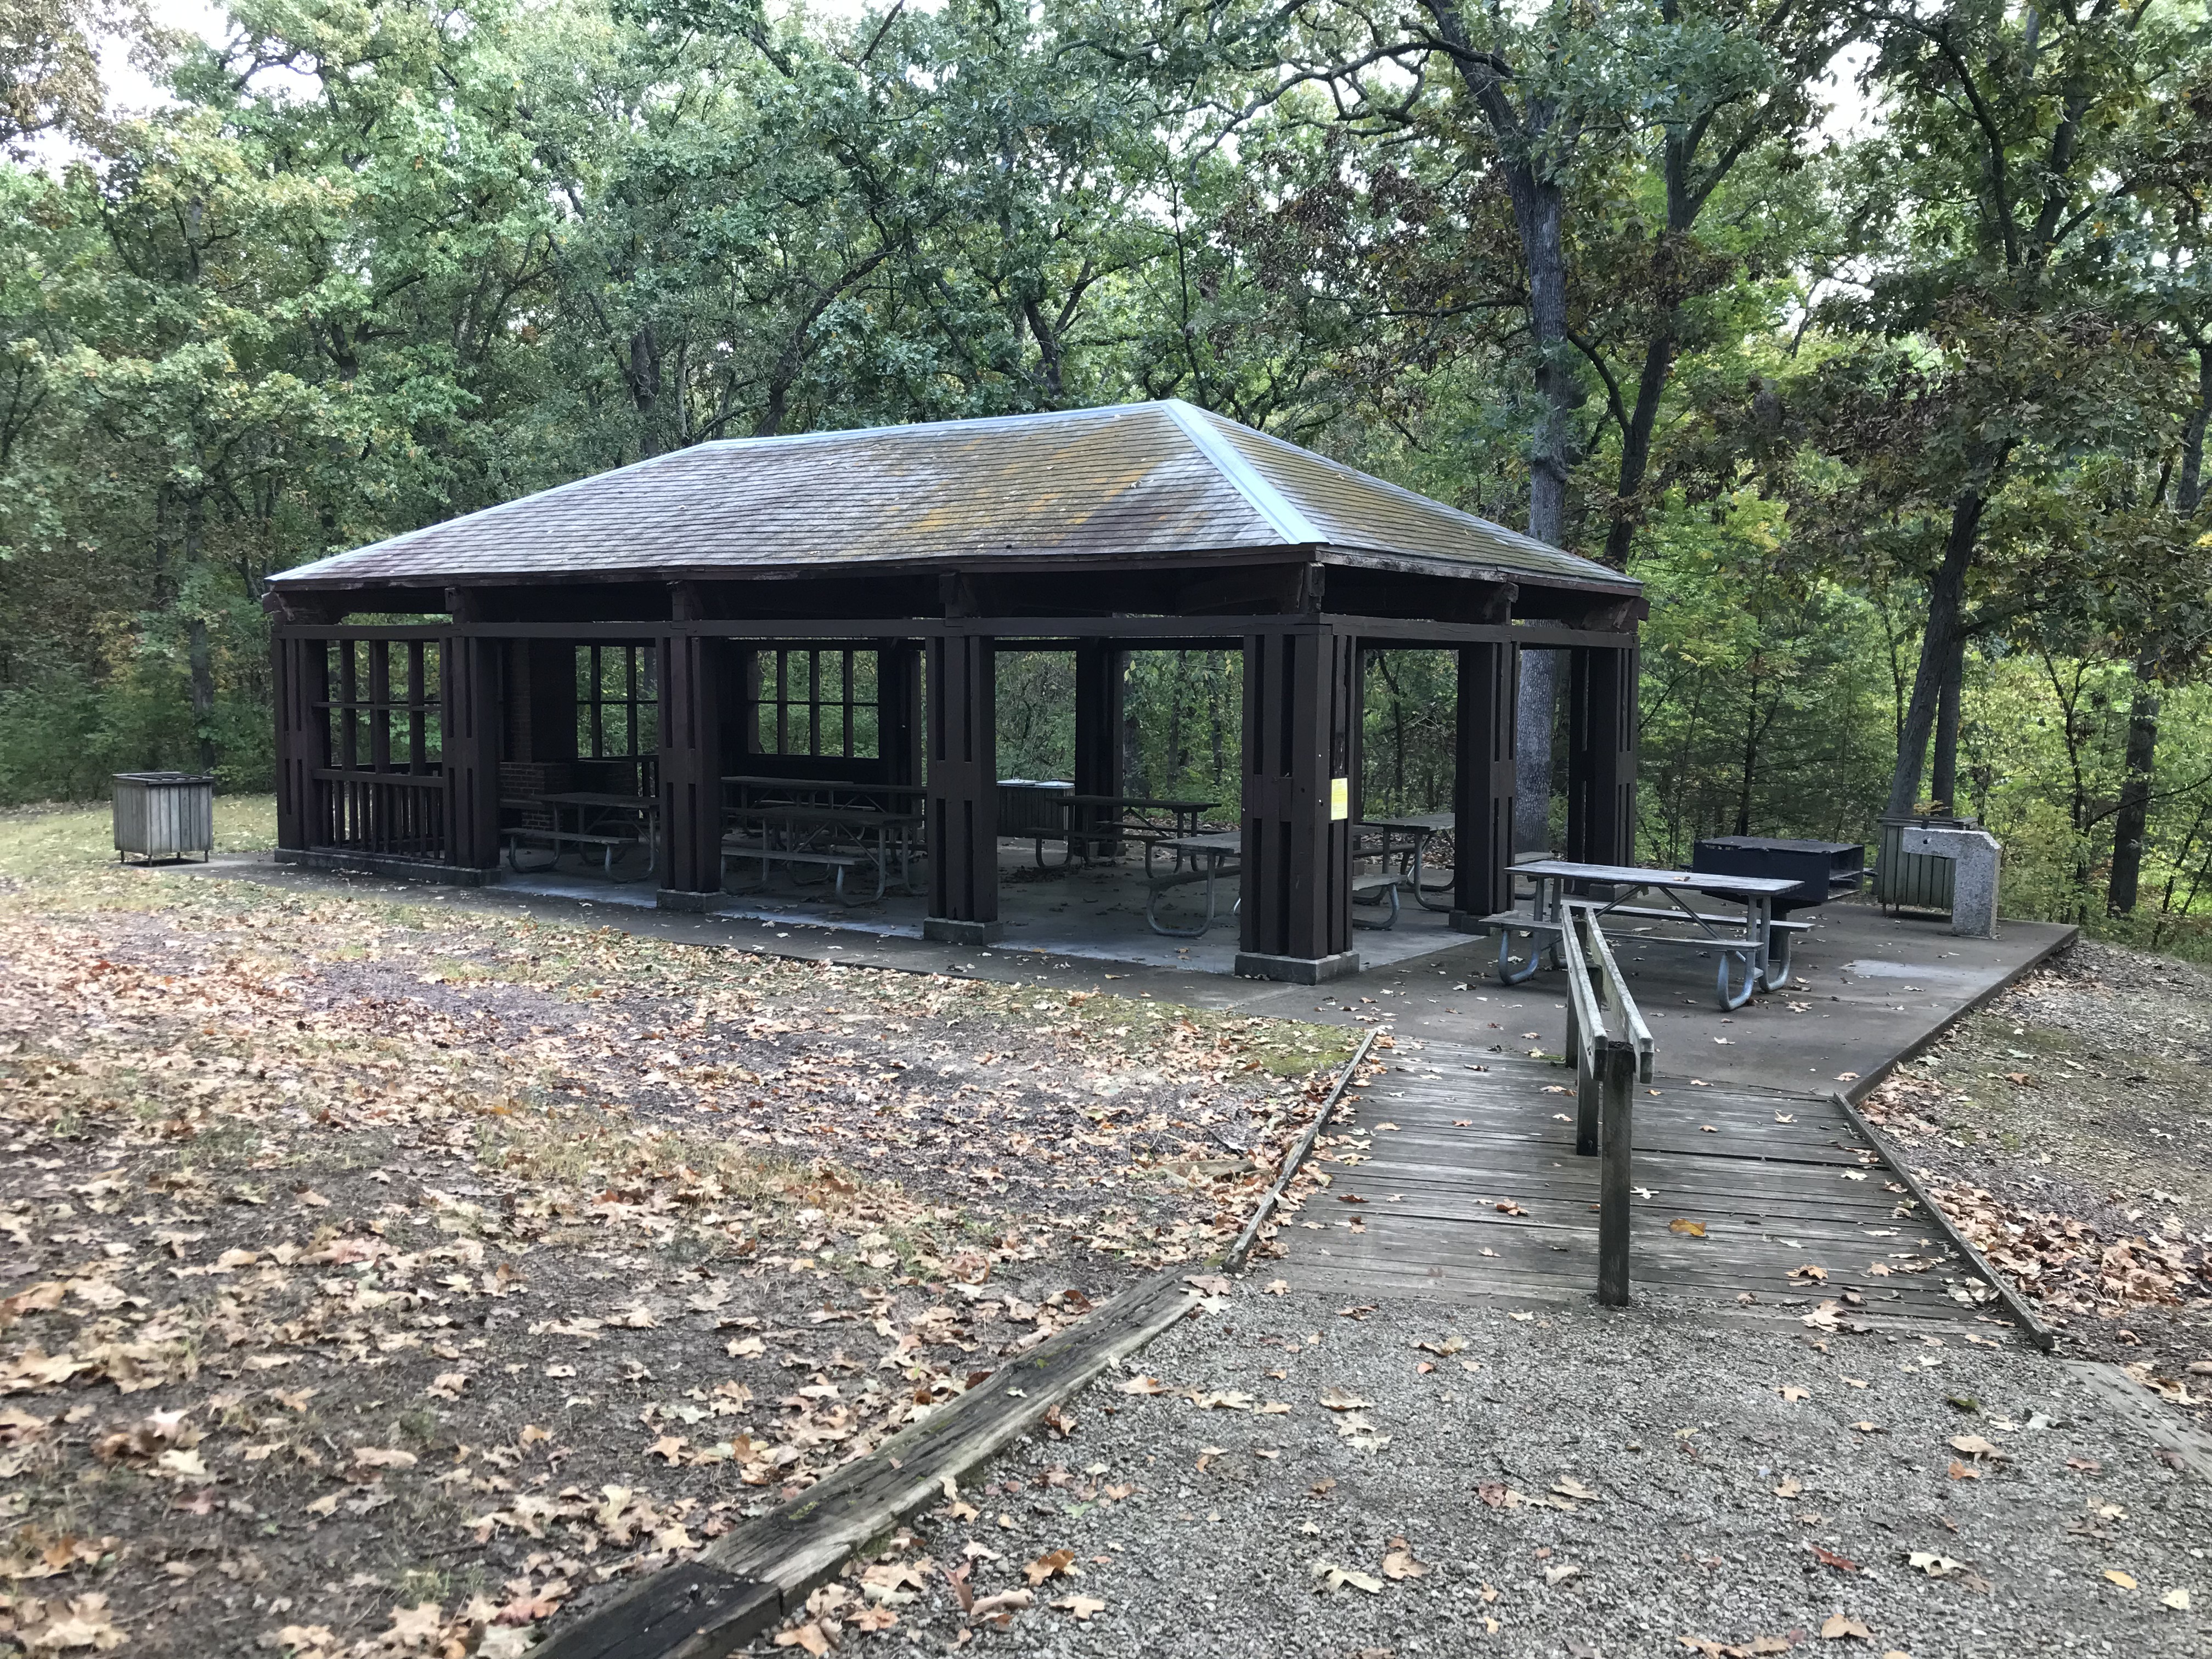 The open, pavilion-style shelter, with picnic tables, a grill and trash bins